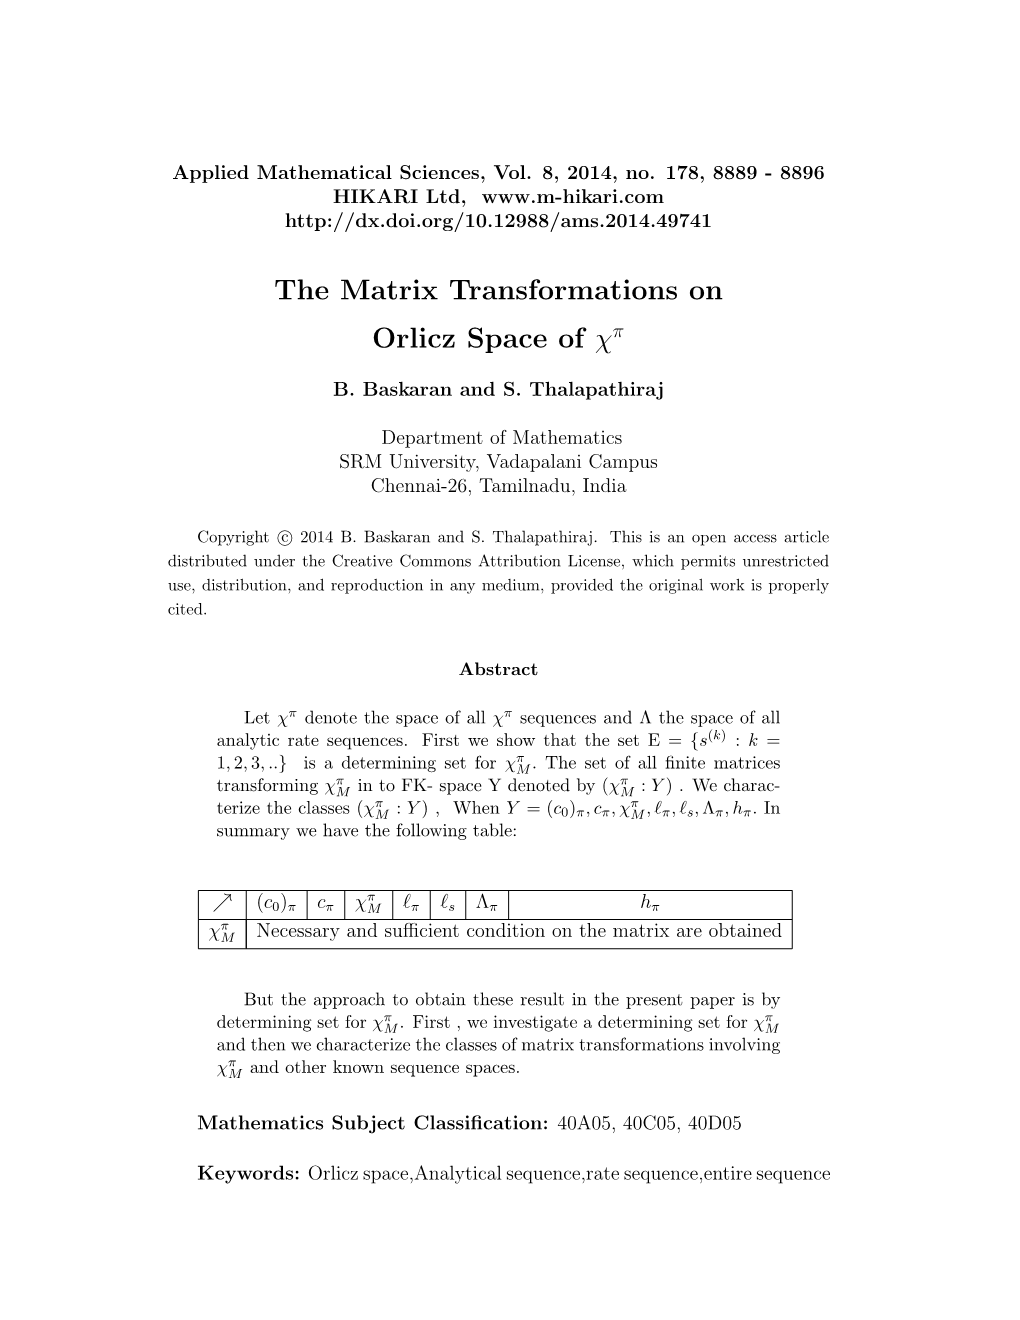 The Matrix Transformations on Orlicz Space of Χπ